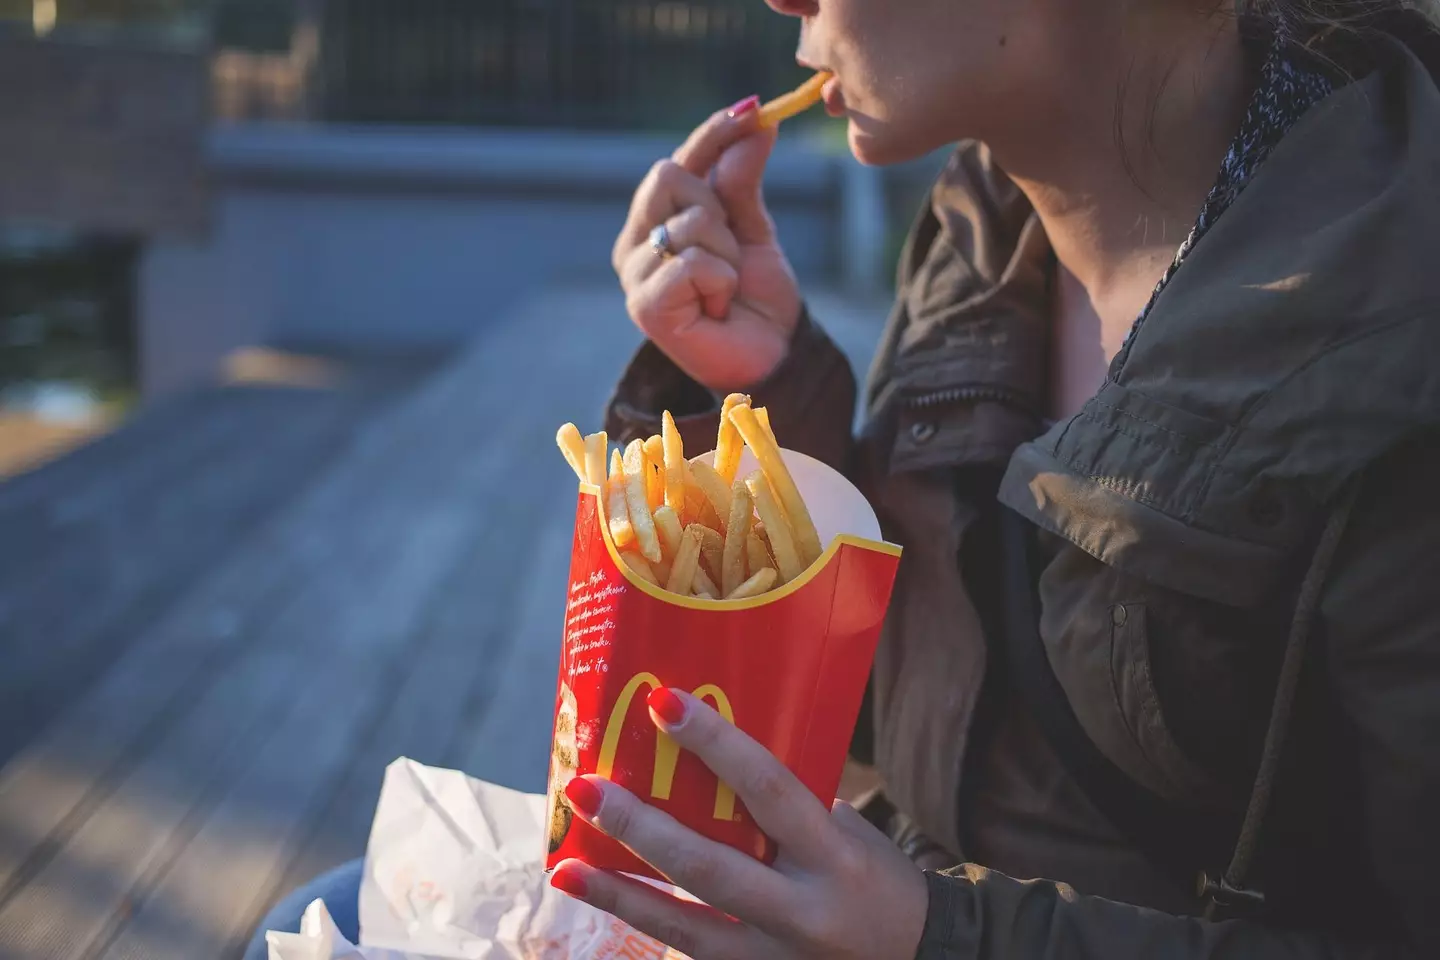 McDonald's customers can win prizes by purchasing menu items.